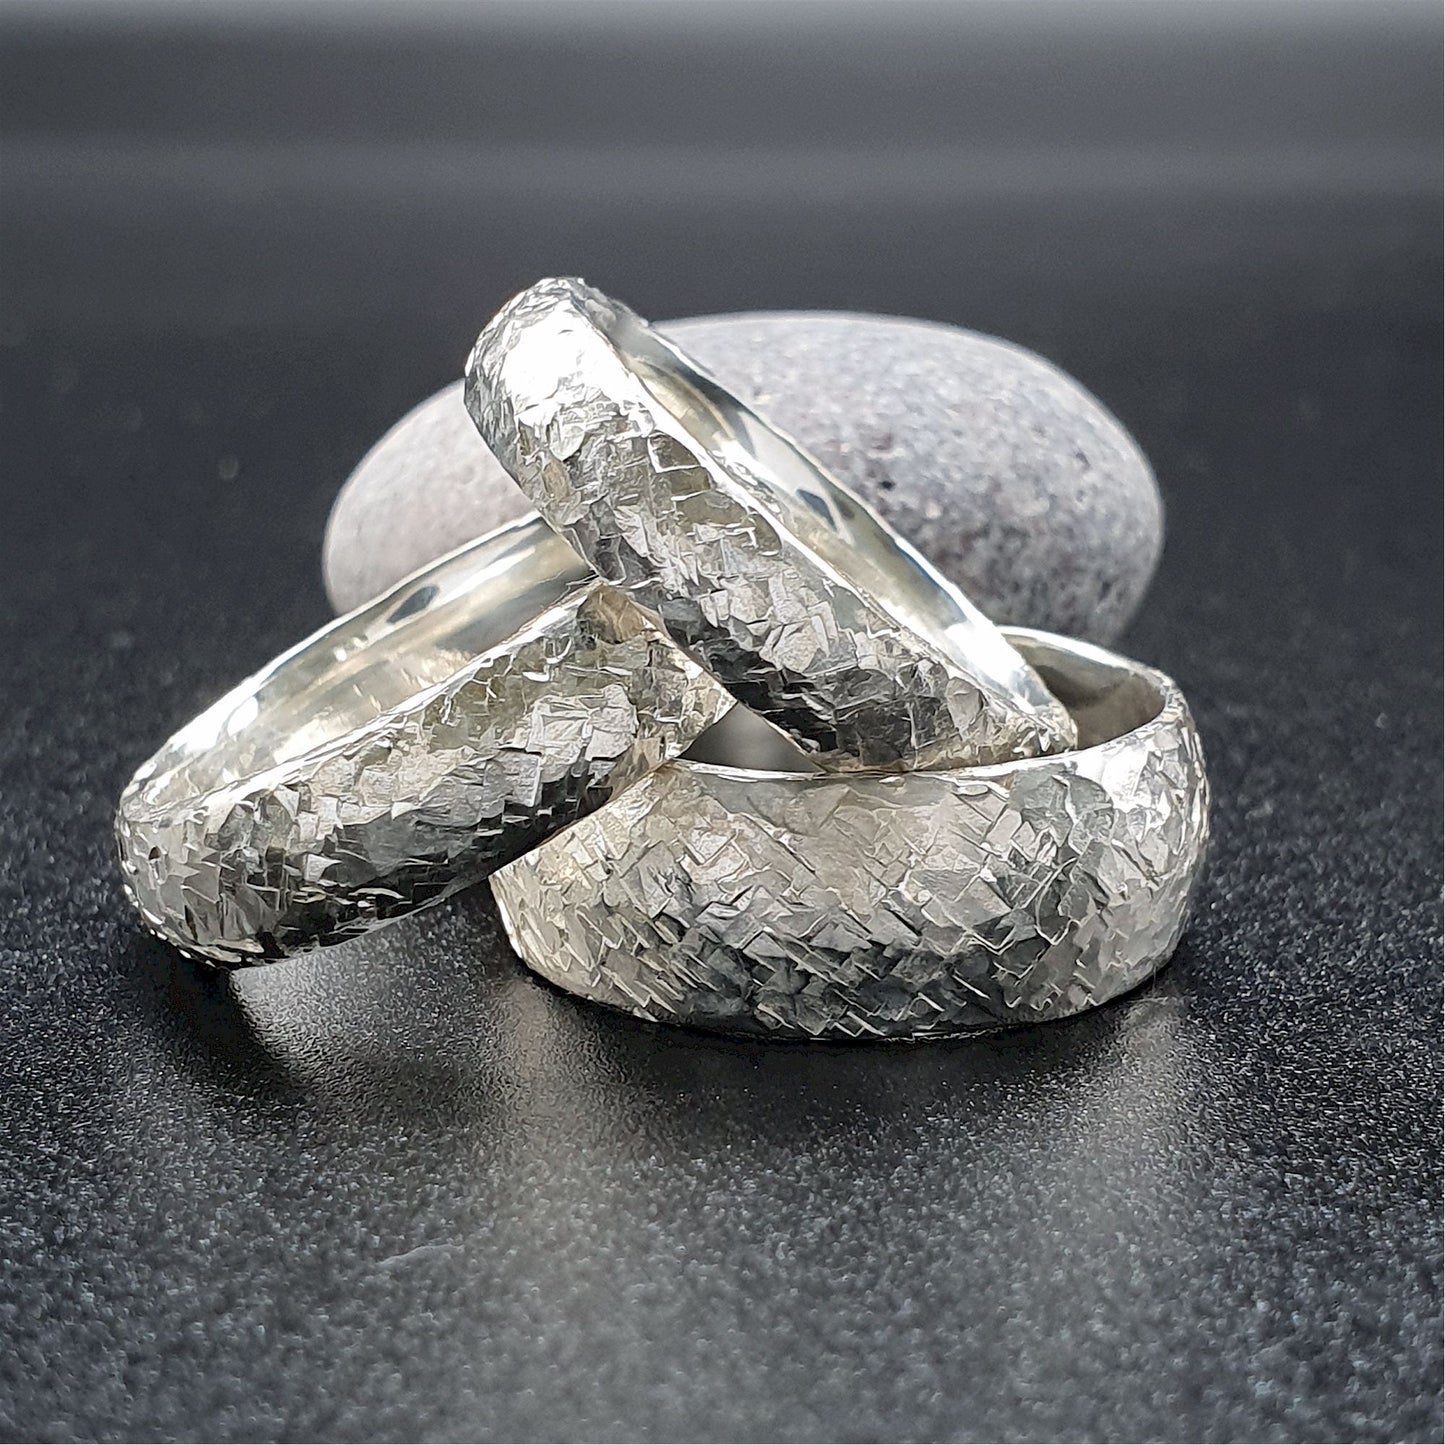 Wedding ring, broad silver Fire hammered design - Cumbrian Designs